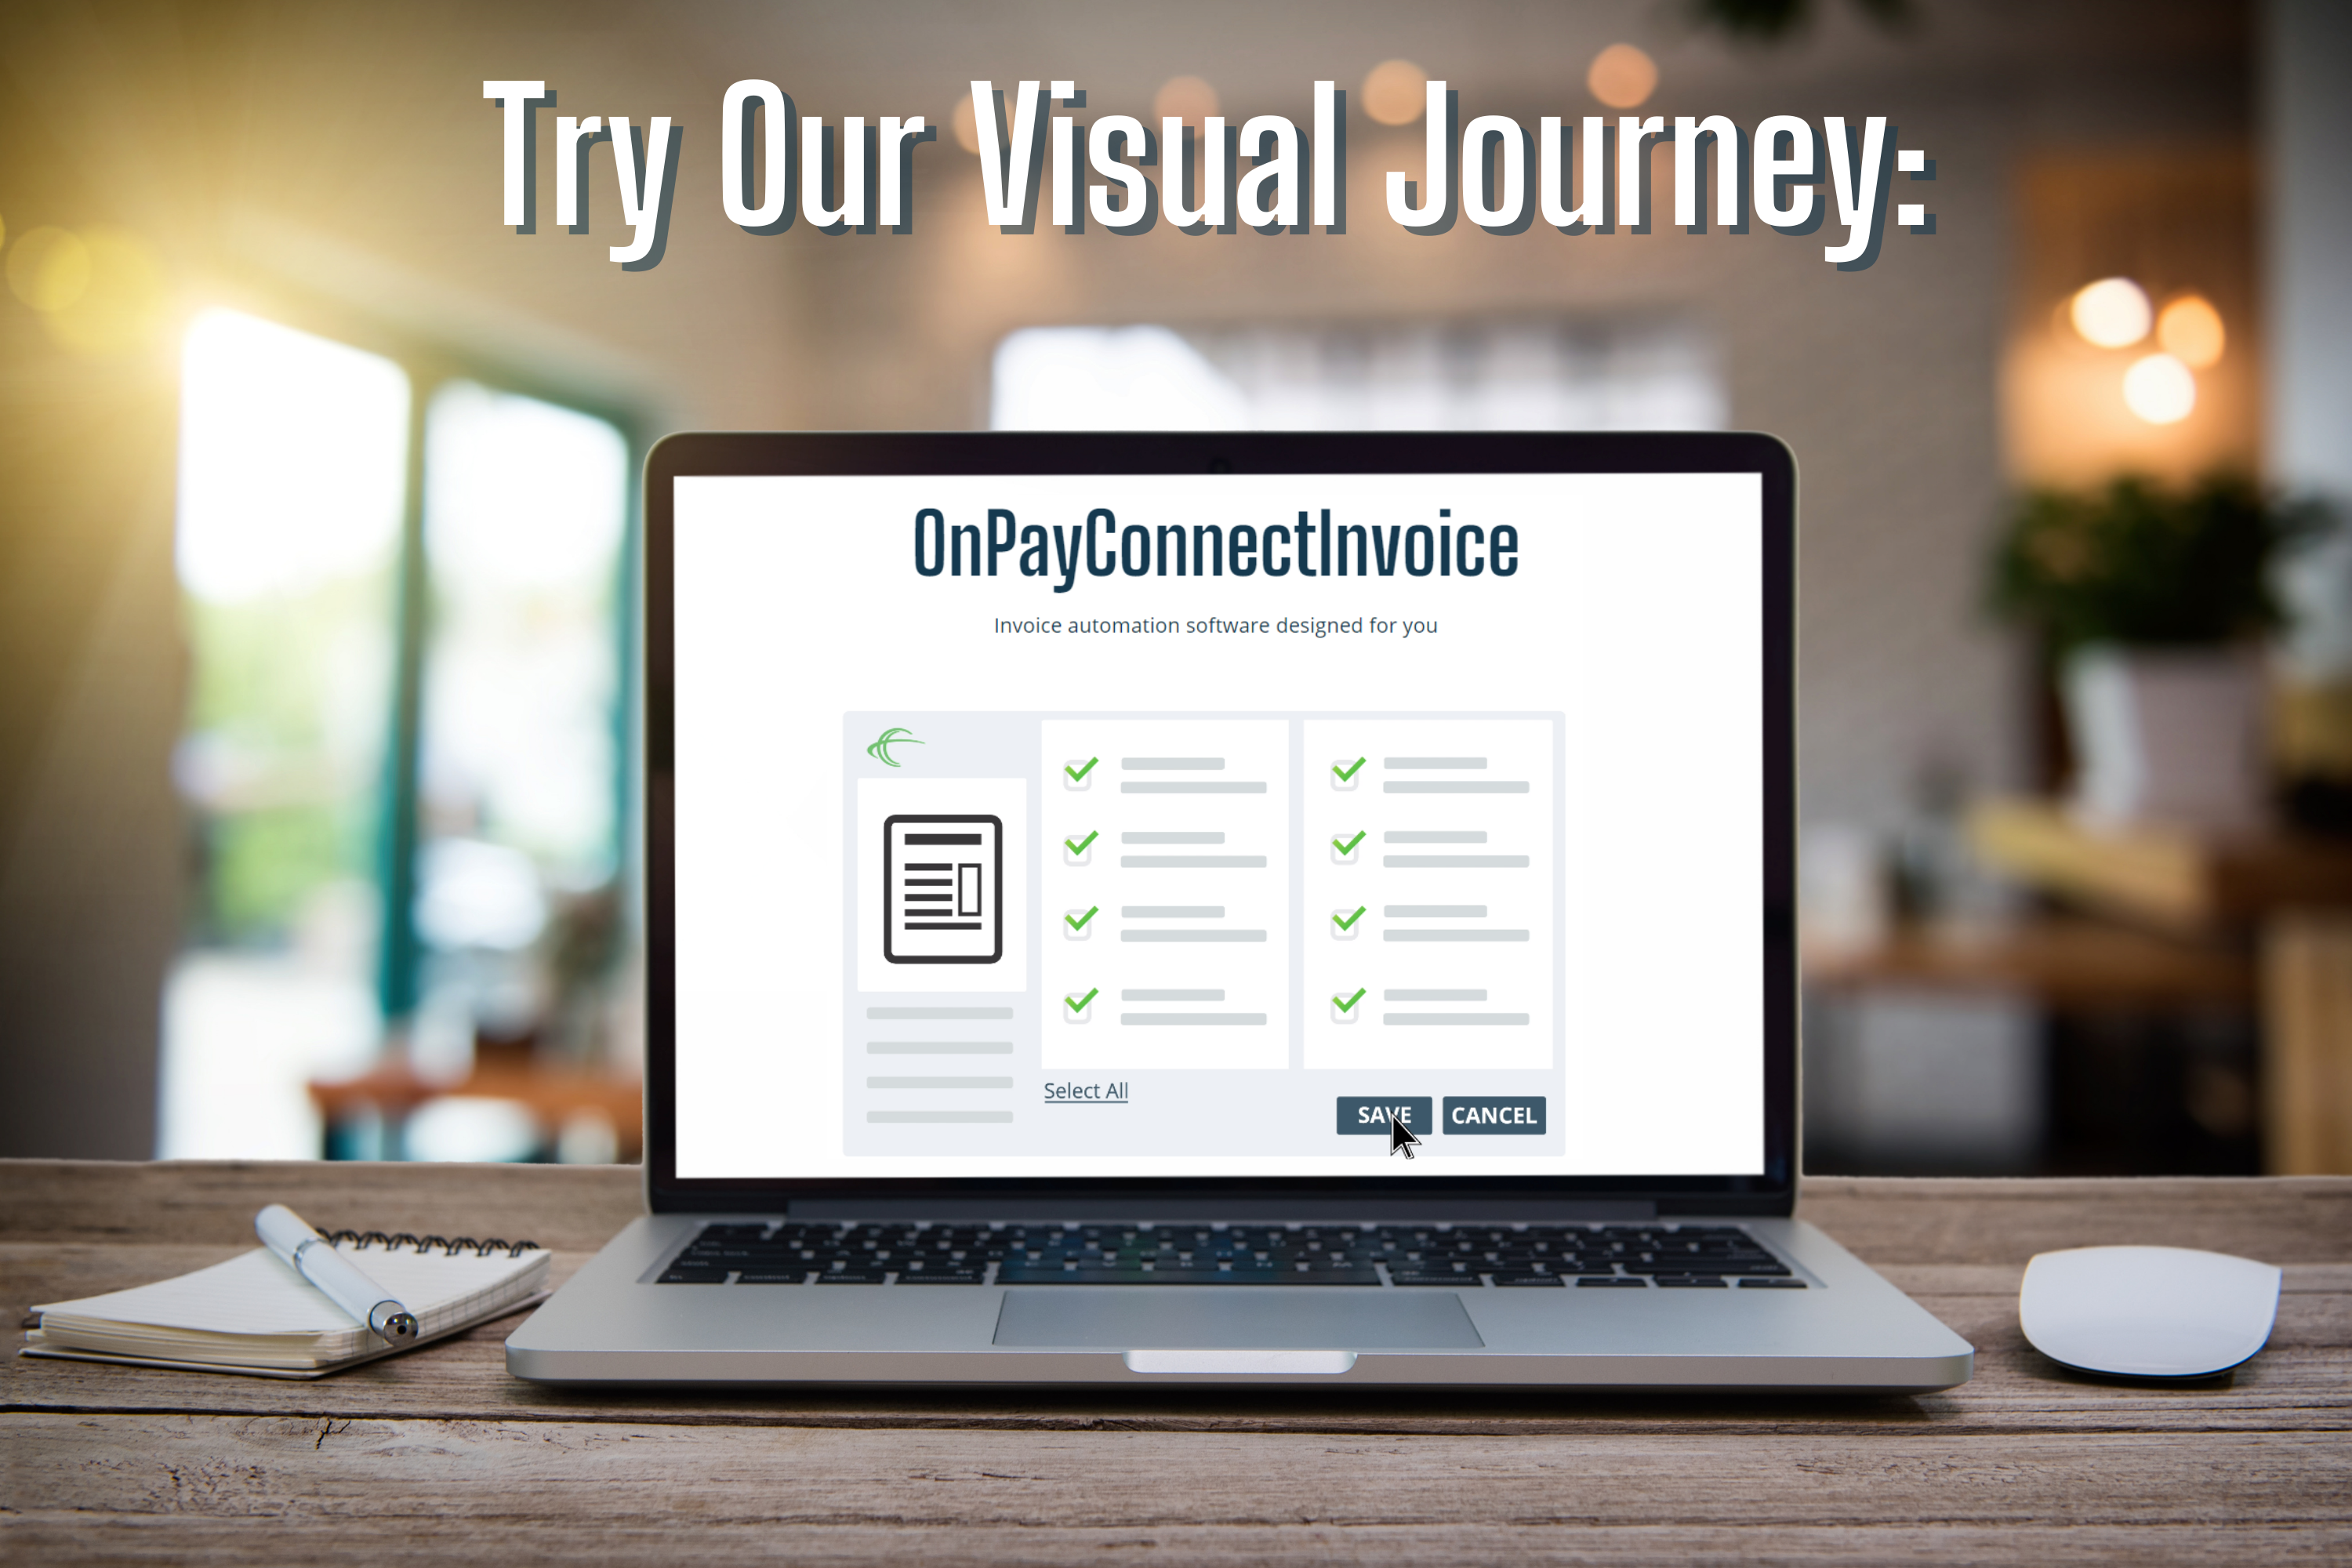 desk laptop with screen showing onpayconnectinvoice automation software visual journey